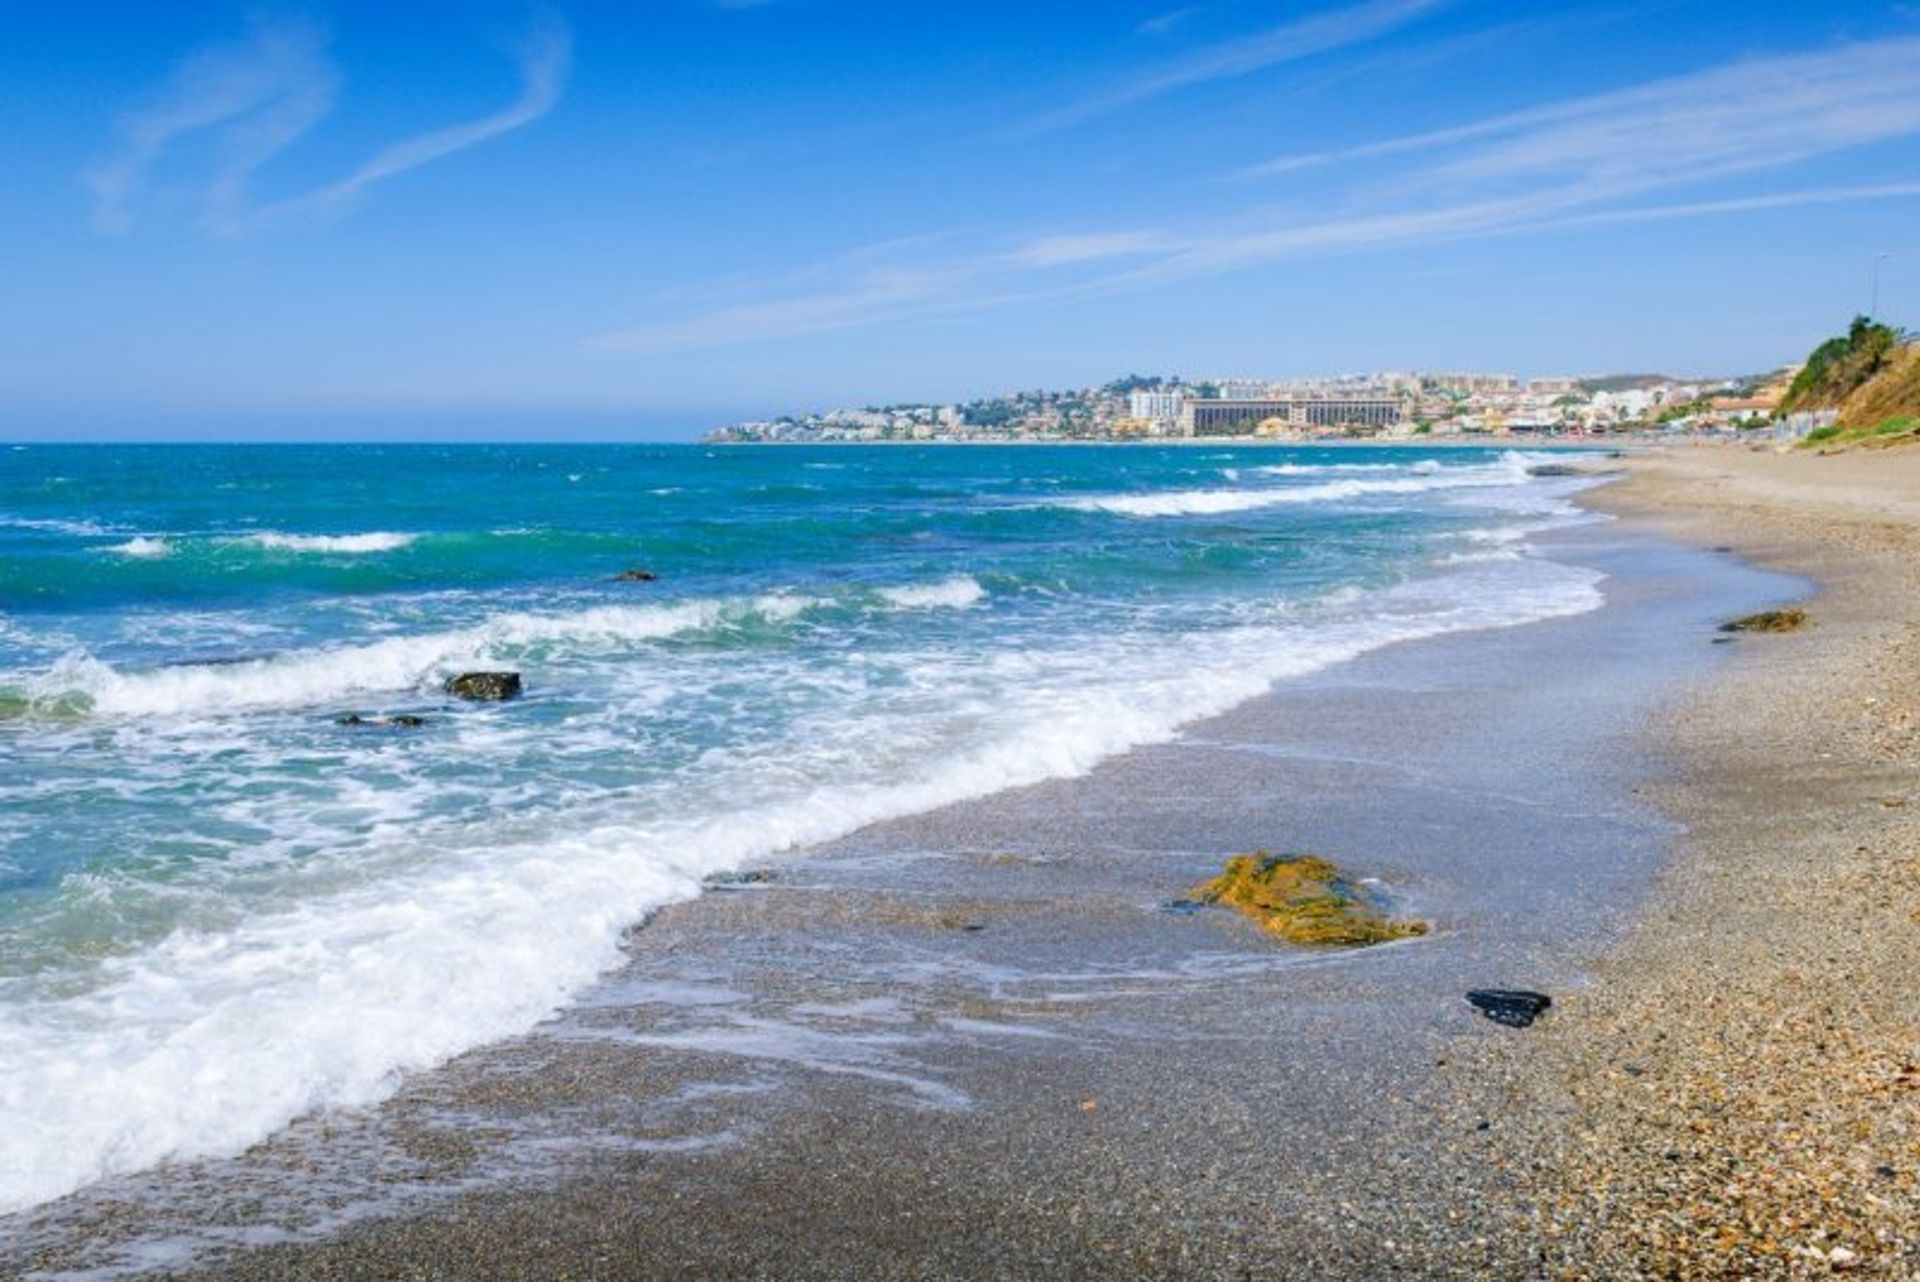 Boasting a stretch of golden sand and aquamarine waters, Mijas beach is the perfect spot for a relaxing day by the coast